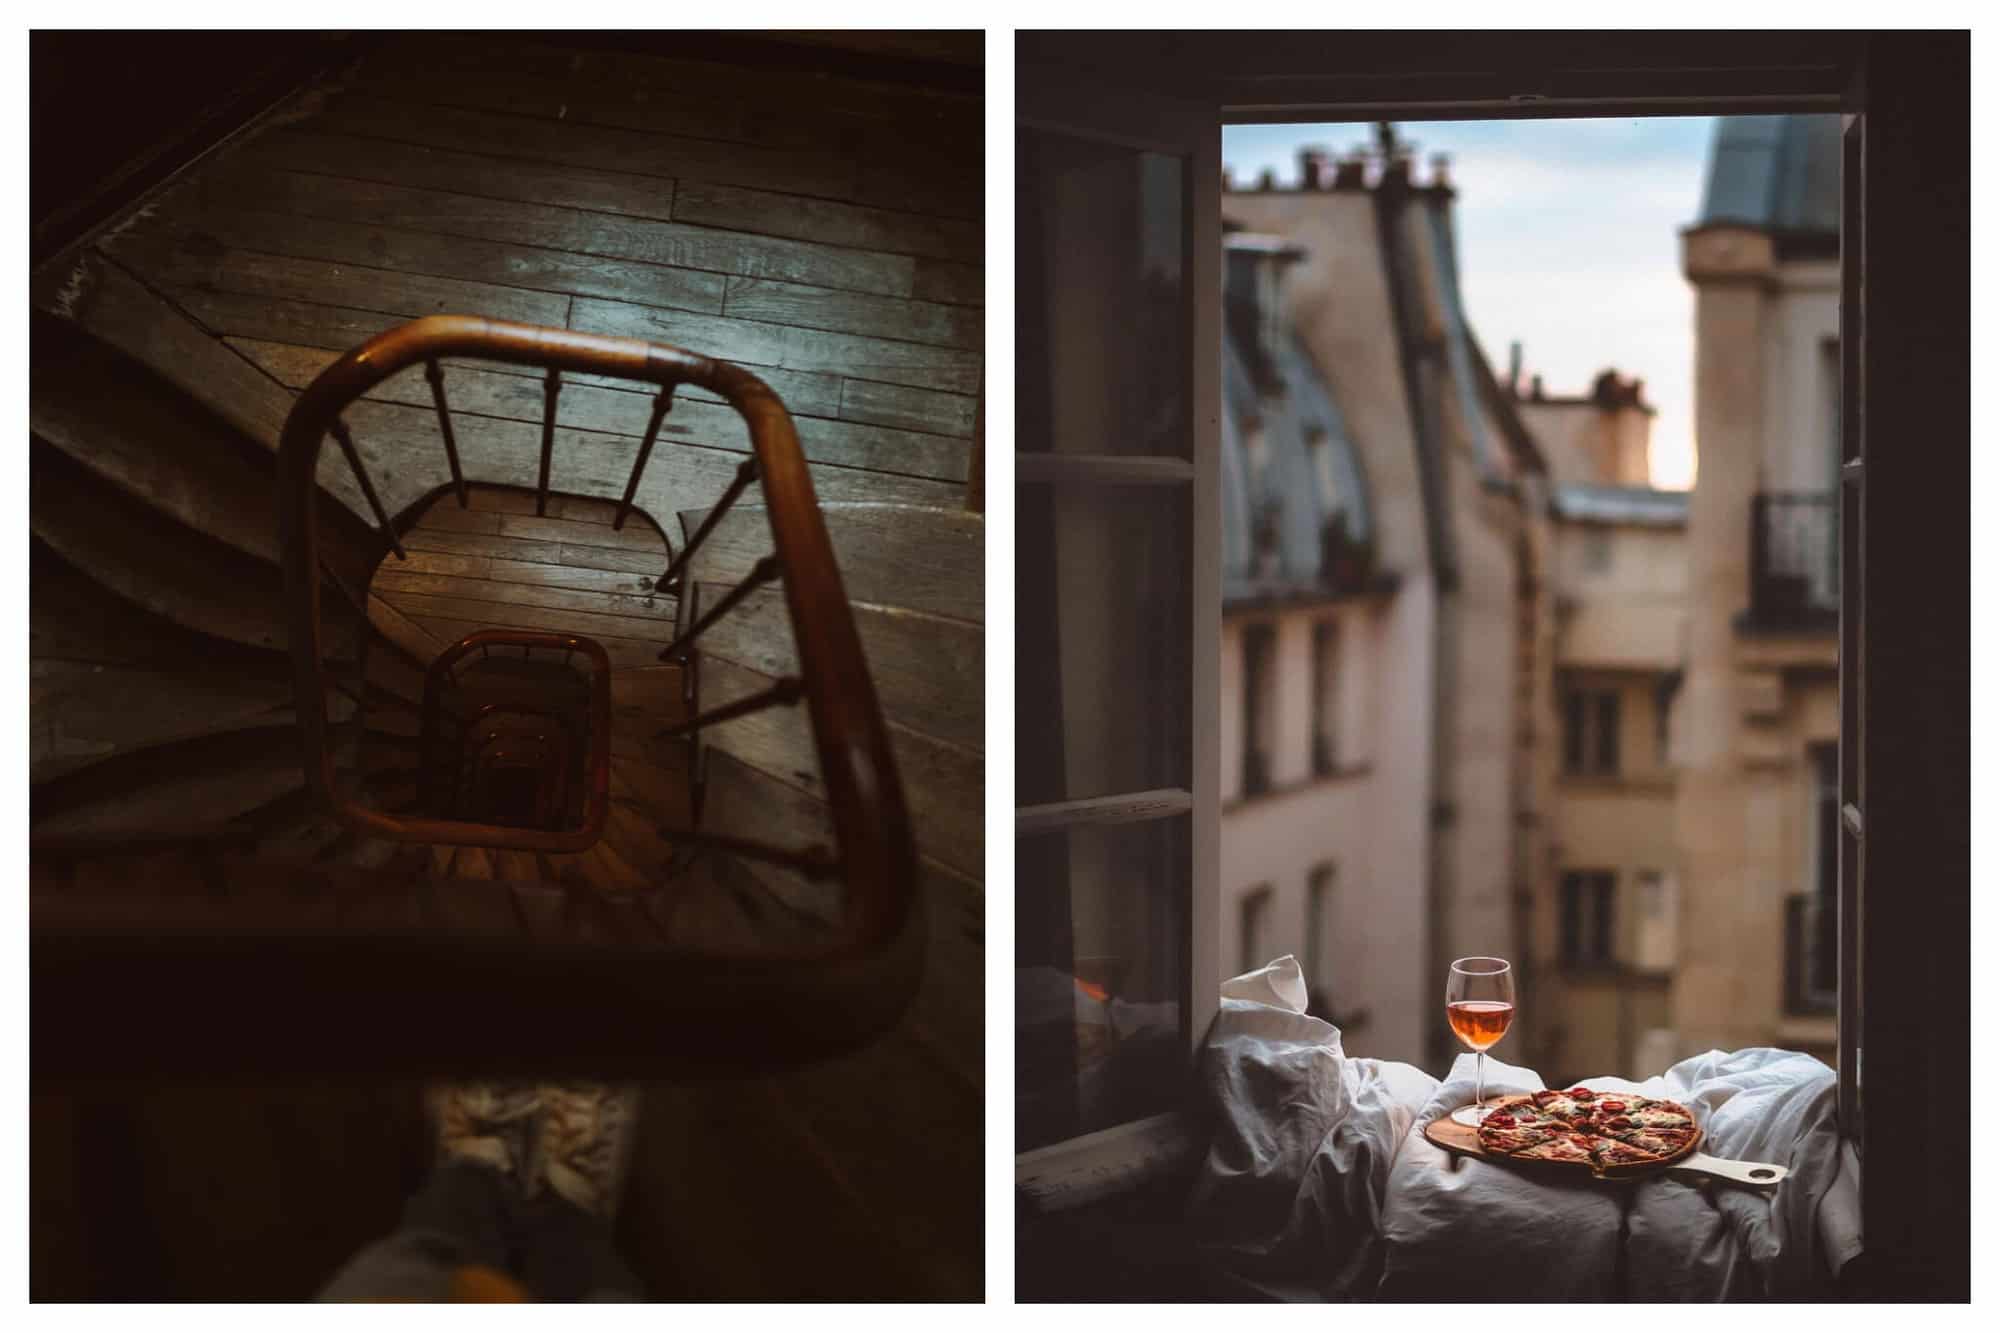 Left: A wooden, Parisian staircase that leads to the Chambre de Bonne apartments. Right: A pan of pizza with a glass of rose sits on a Parisian window overlooking other Parisian buildings.